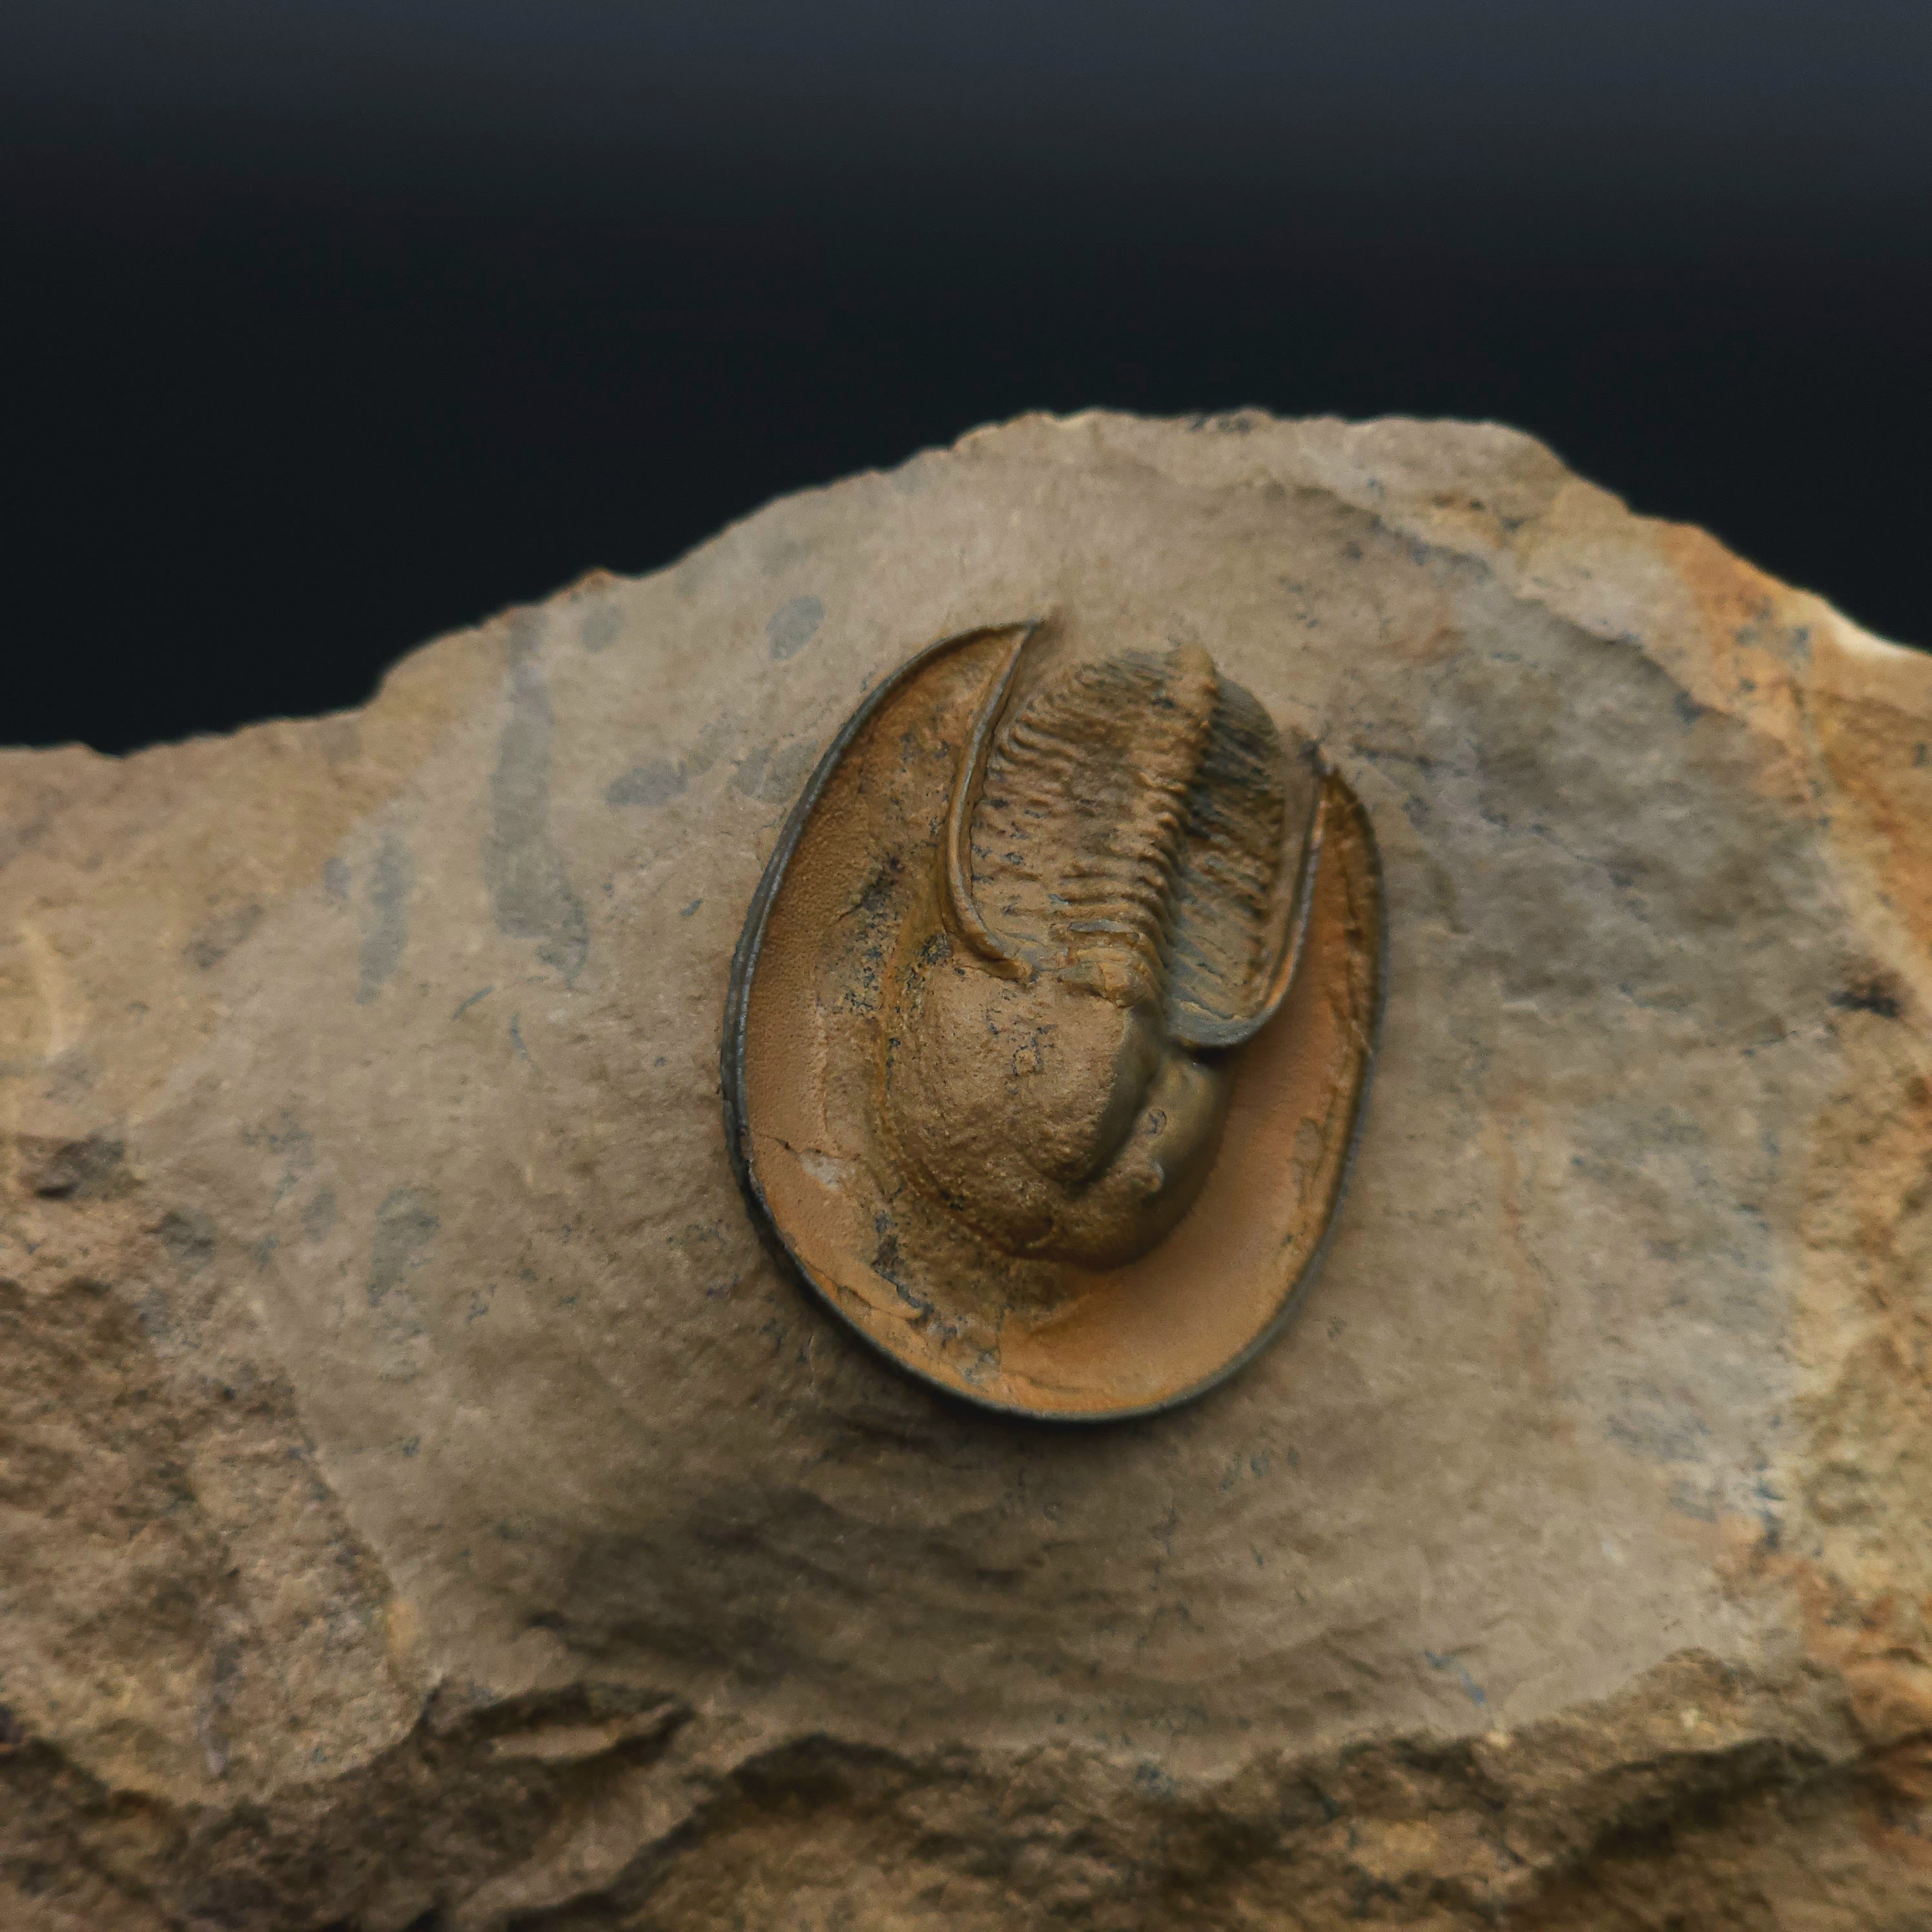 Eoharpes Trilobite Fossil - Devonian Age Harpes species from Ouzina, Morocco